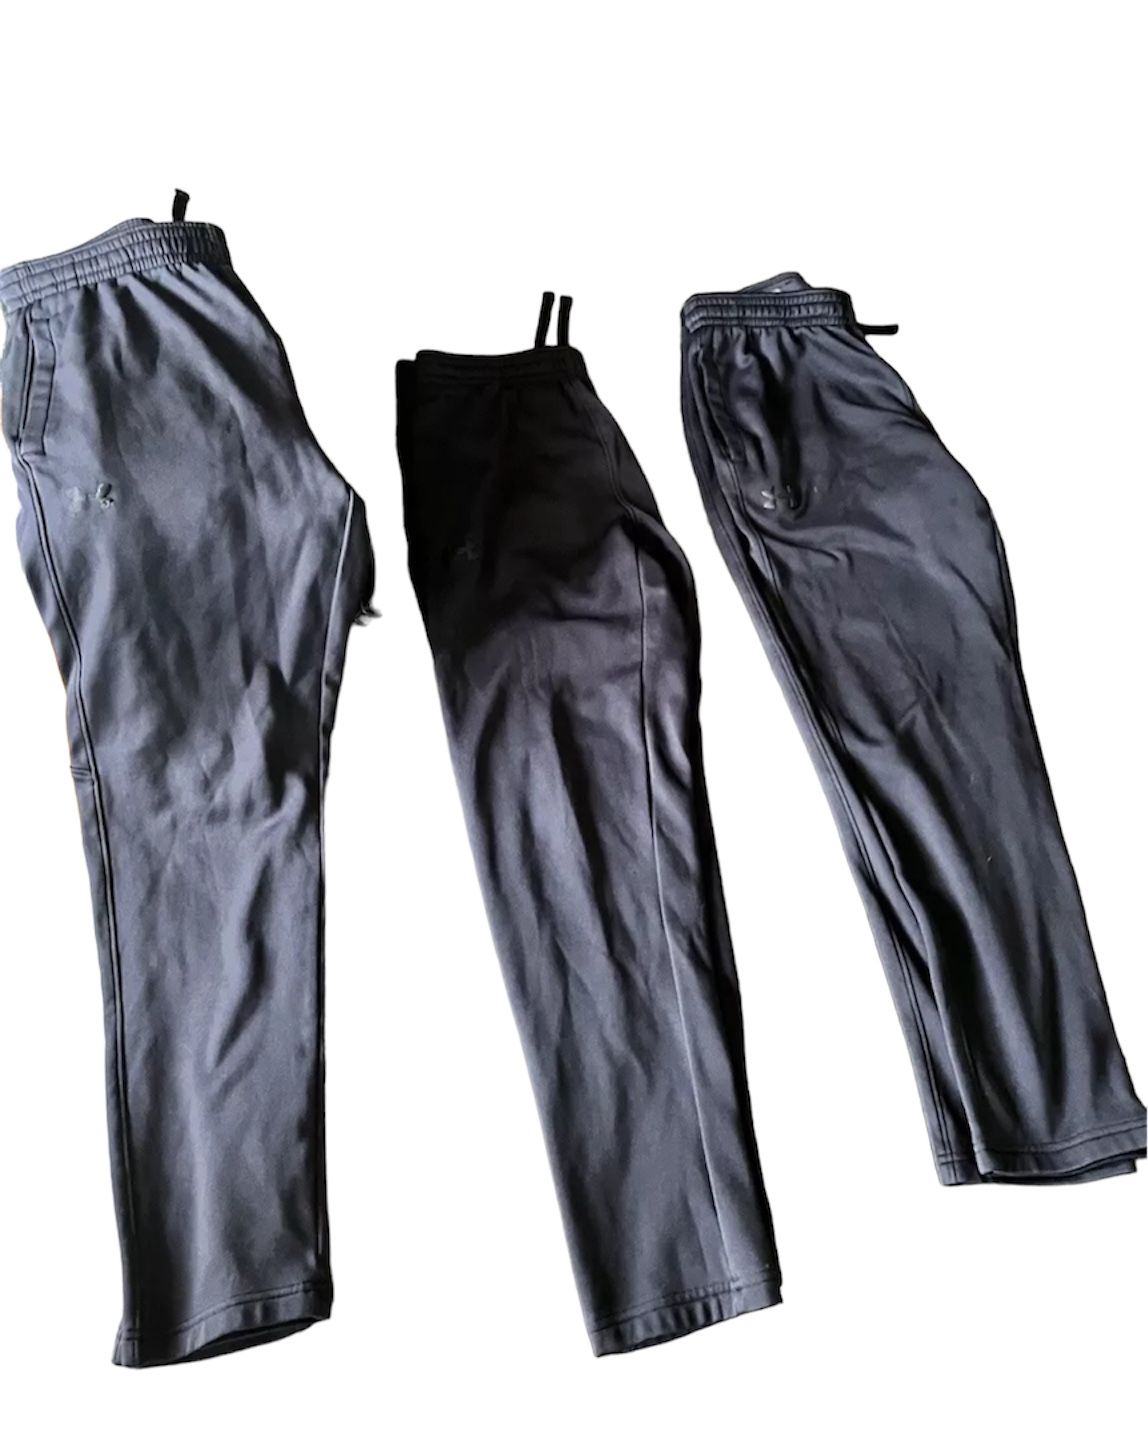 UNDER ARMOUR JOGGERS POLYESYER SIZE LARGE (3 PAIRS BLACK)